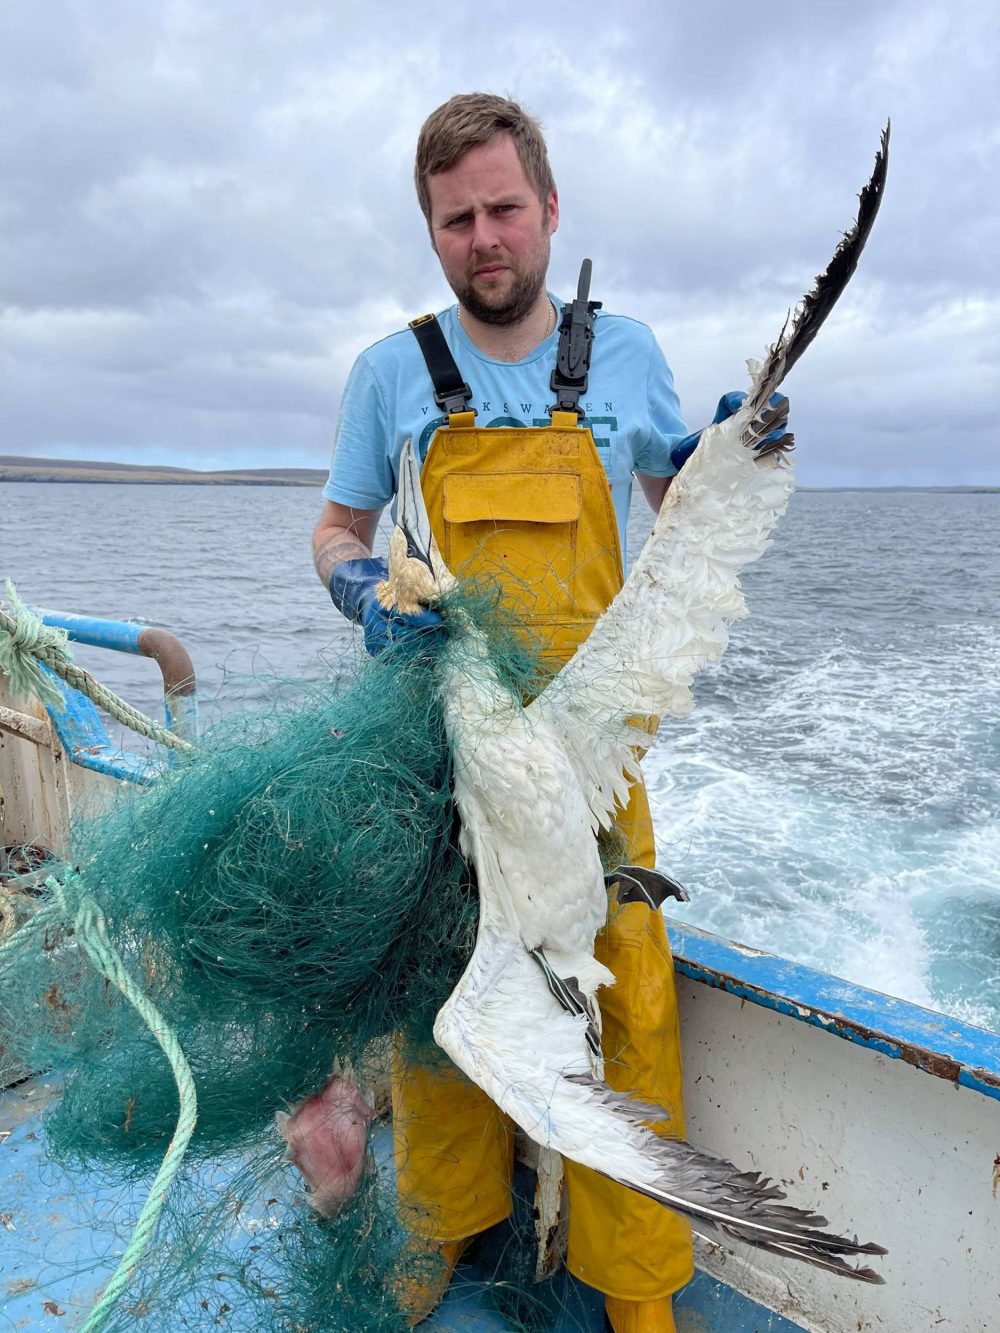 Barbaric! Distressing images show dead gannet trapped in fishing wire